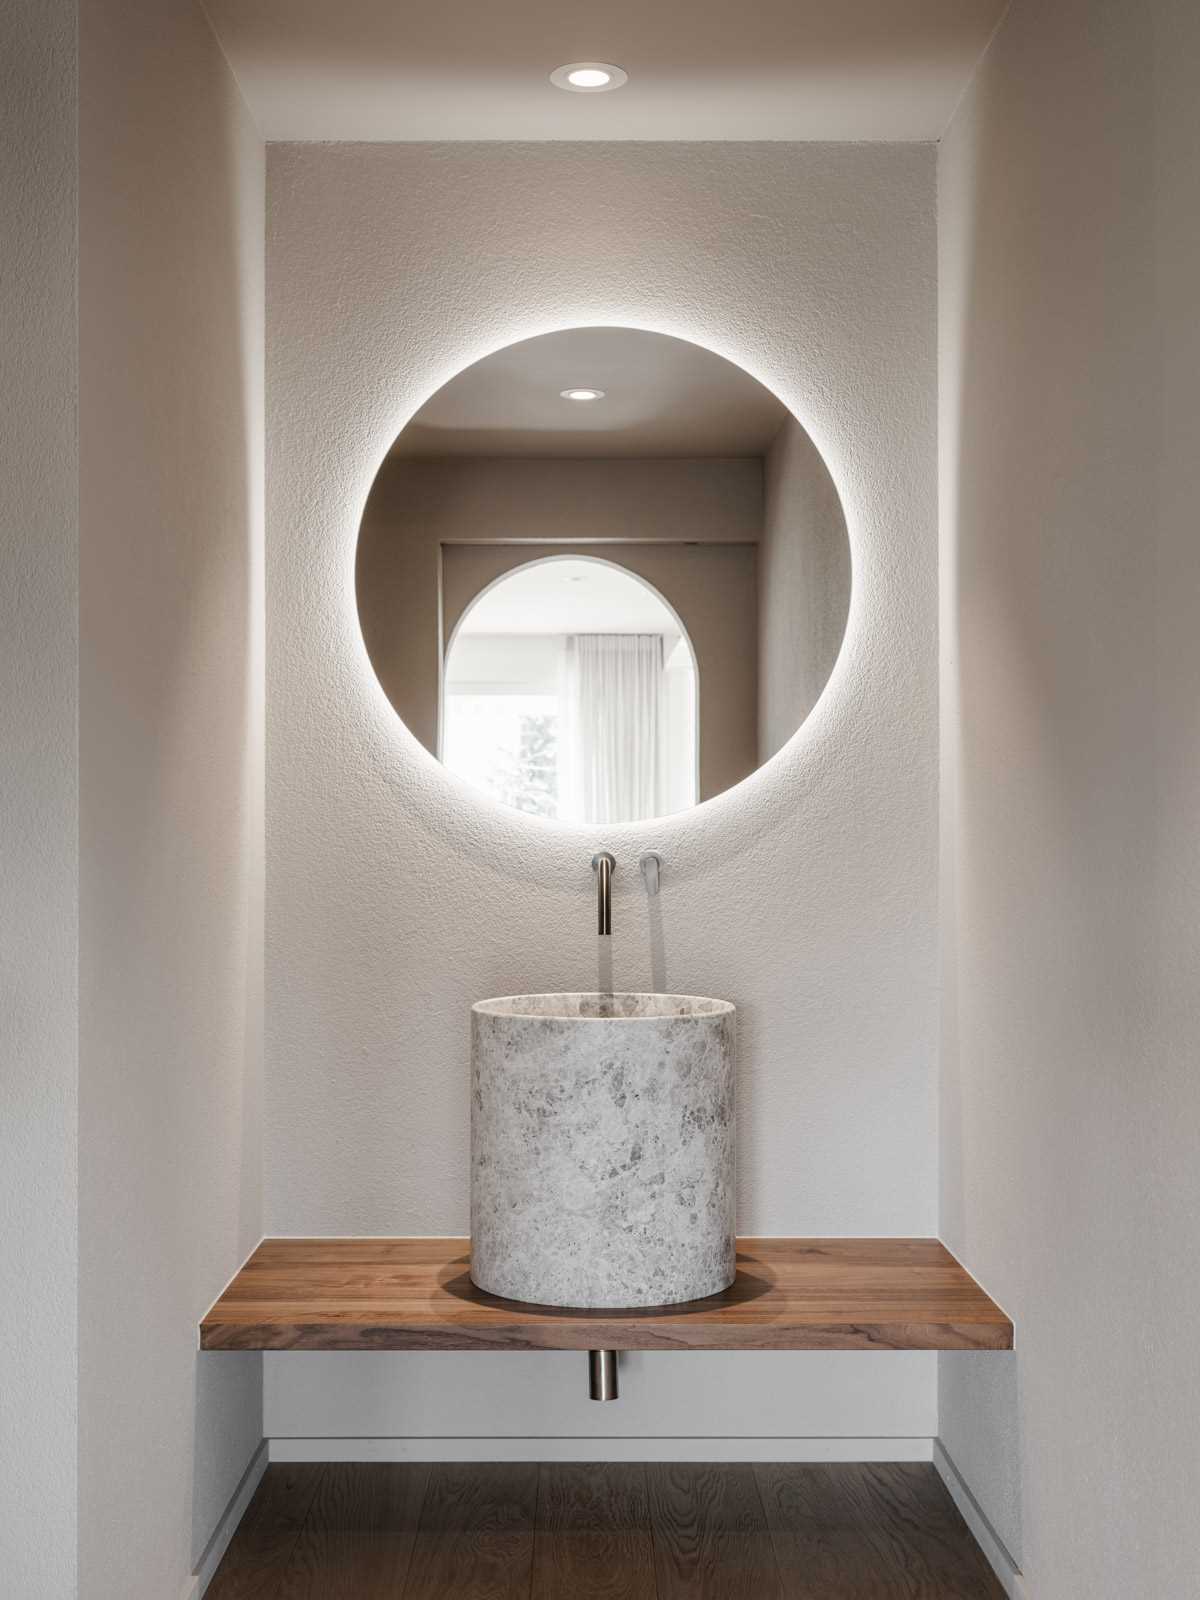 A round back-lit mirror is mounting above a stone sink.